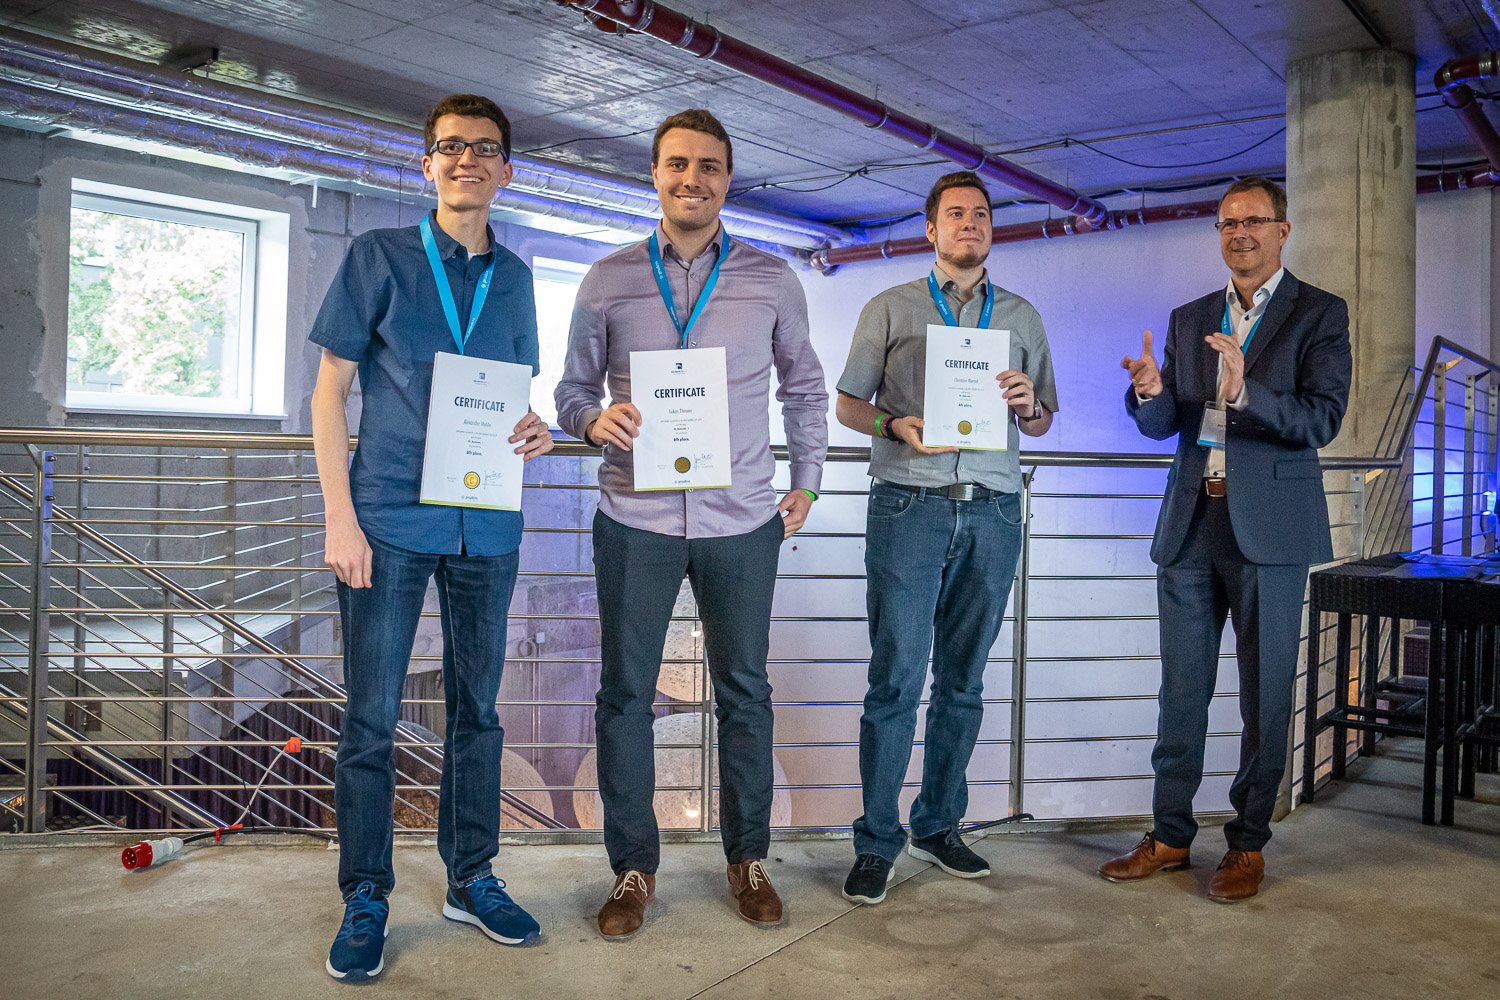 prudsys retail intelligence summit 2019 | Conference on AI in Retail | Awards and certificates